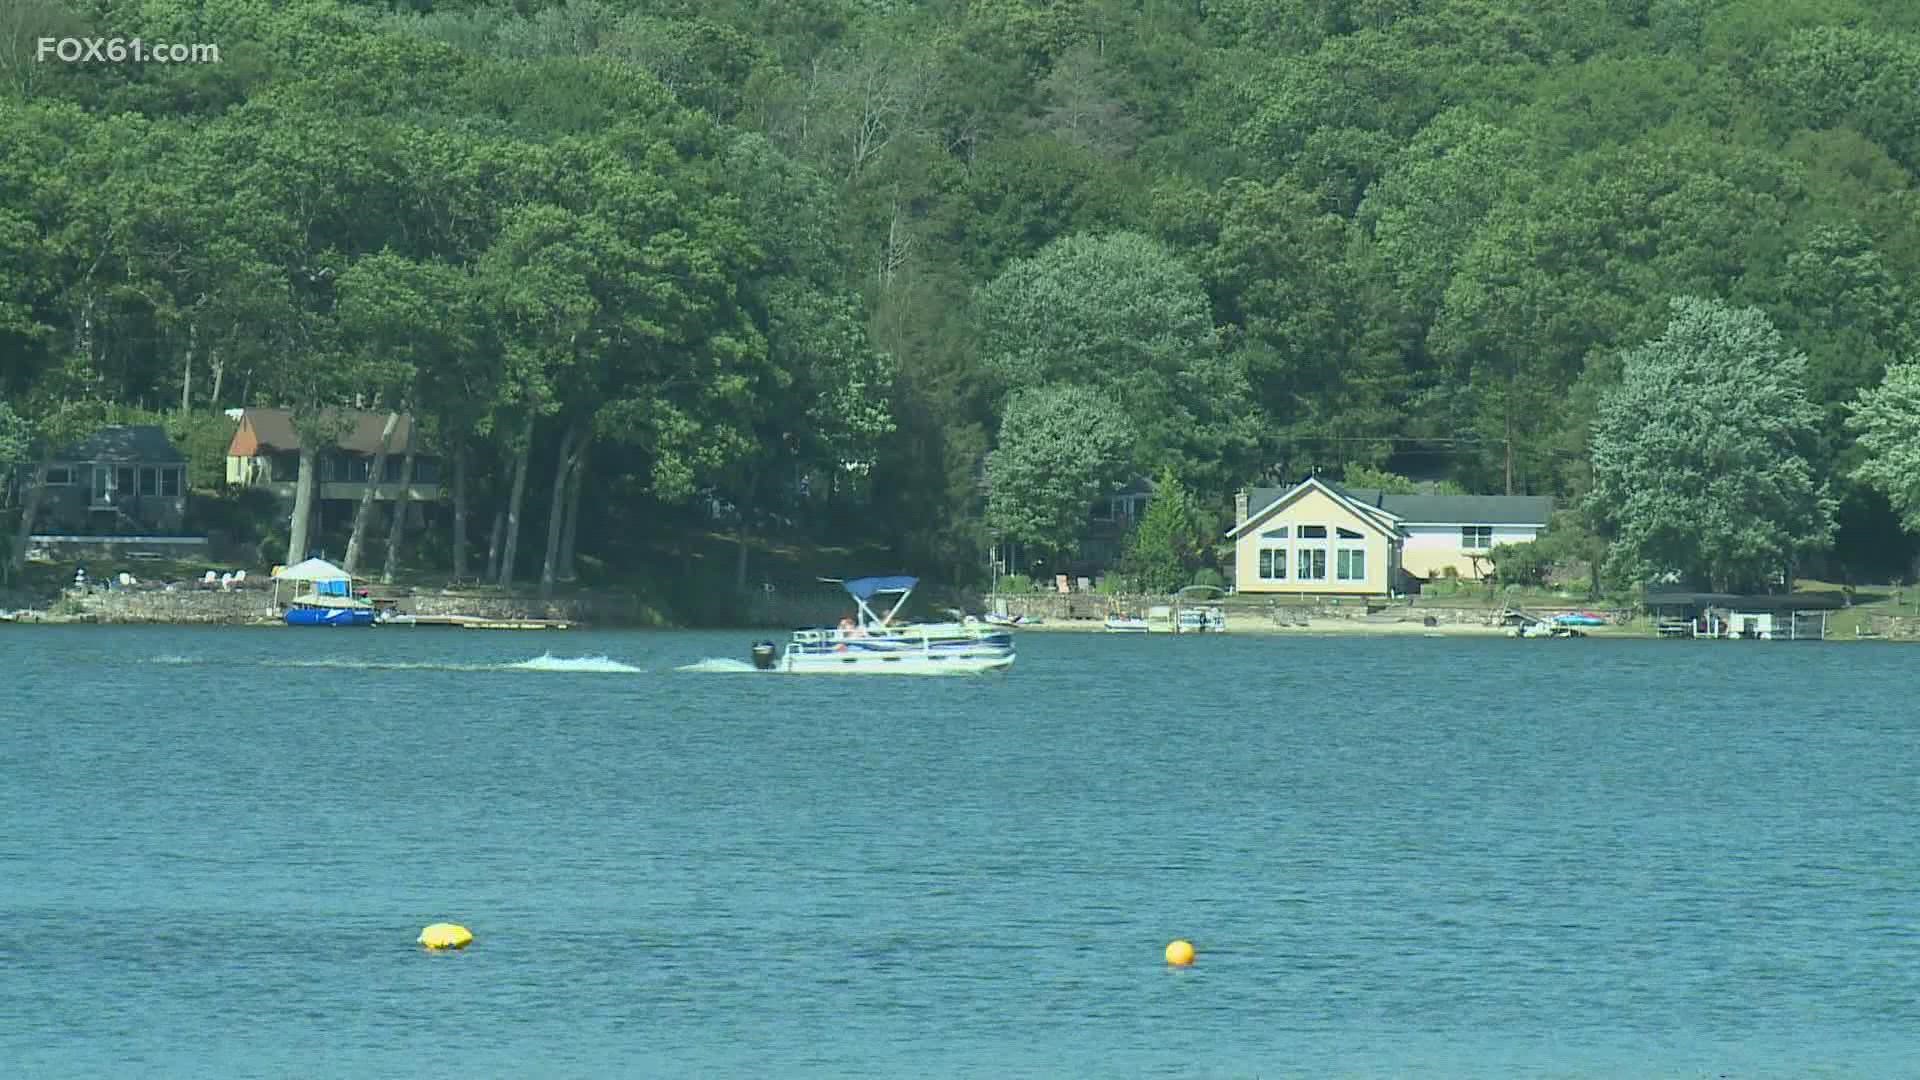 Summer on Coventry Lake is paused until potentially mid-August after a bloom of blue-green algae was detected.